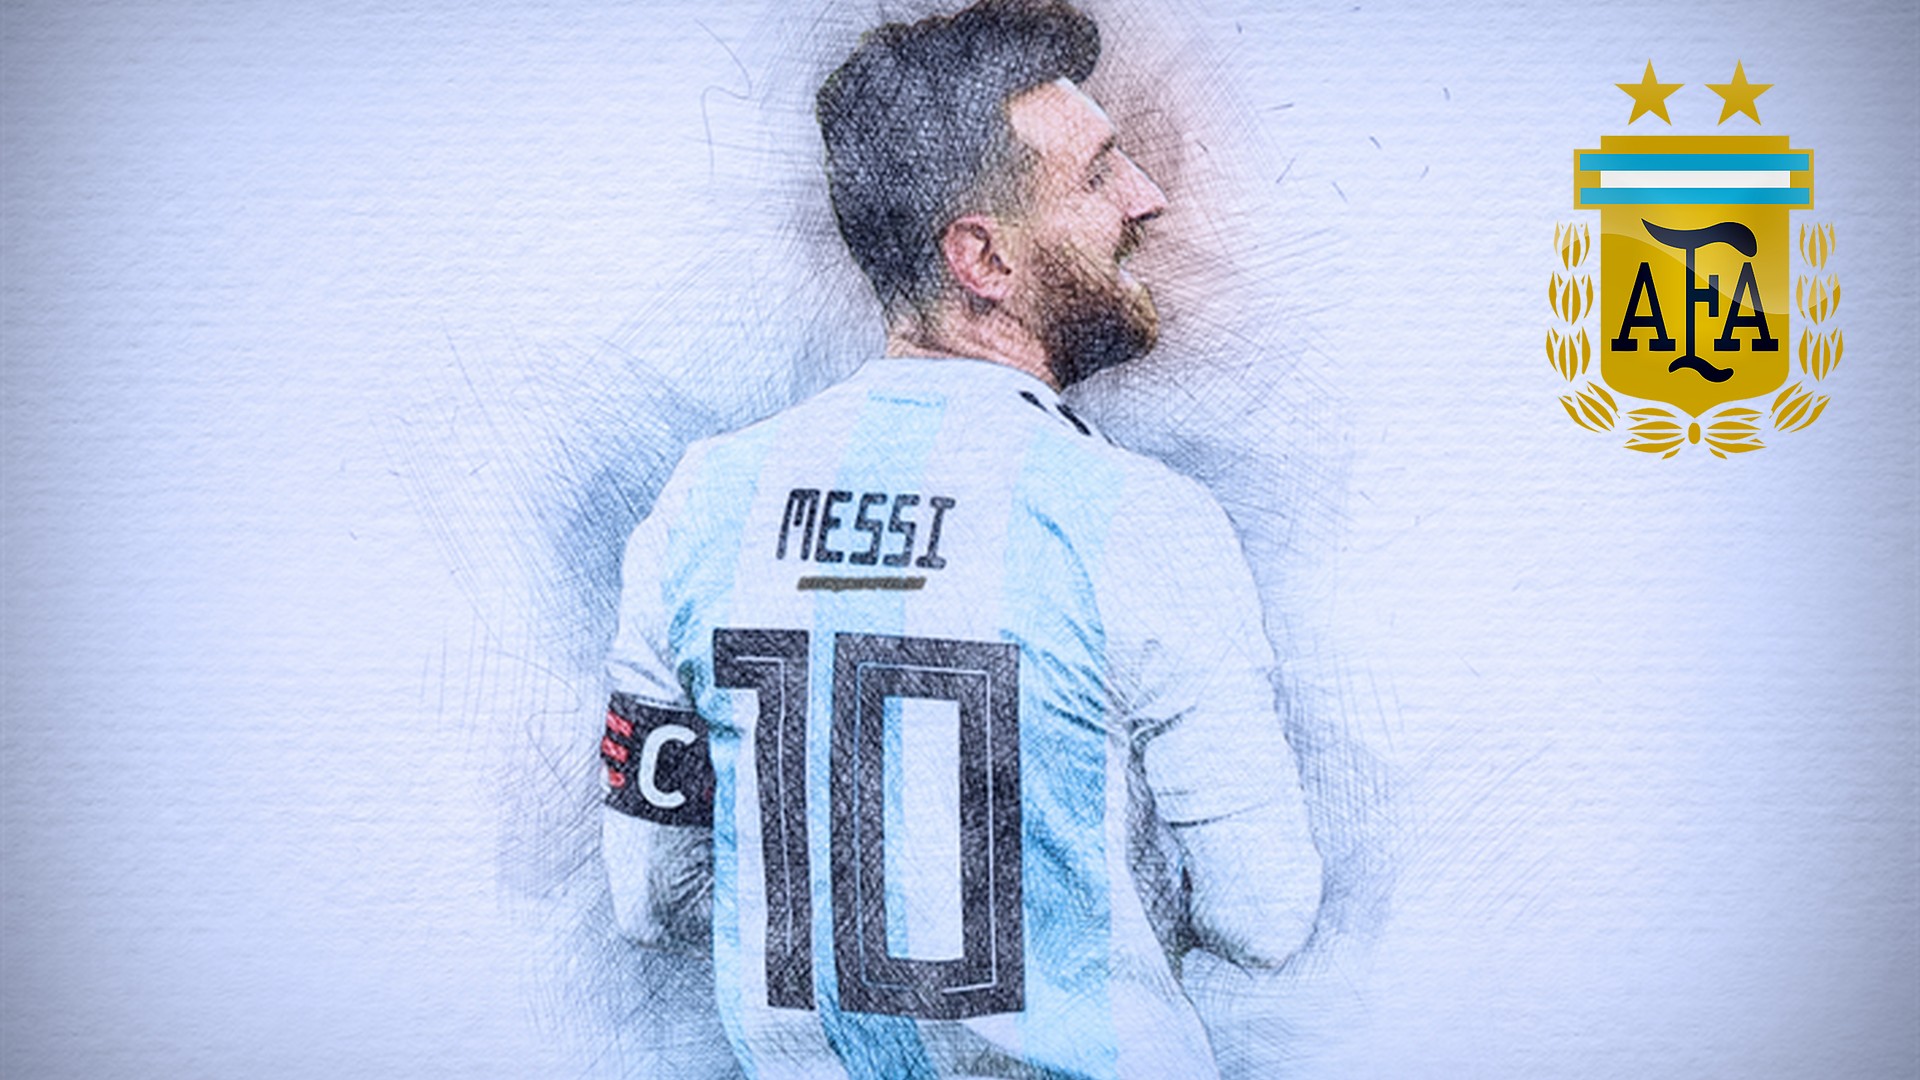 Best Messi Argentina Wallpaper with image resolution 1920x1080 pixel. You can use this wallpaper as background for your desktop Computer Screensavers, Android or iPhone smartphones